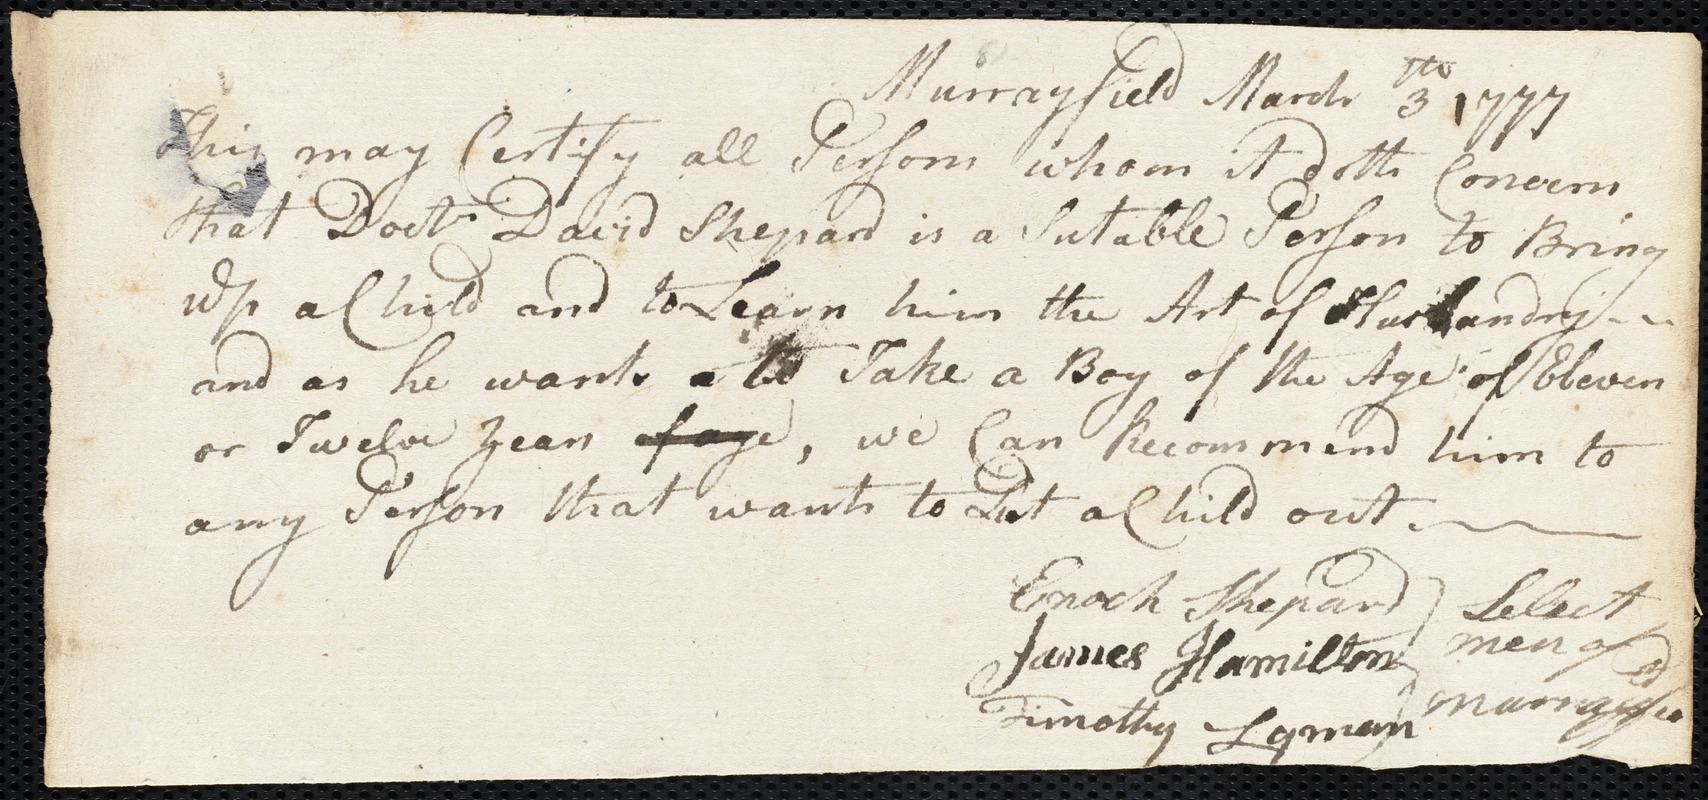 Joseph Glossip indentured to apprentice with David Sheppard of Murrayfield, 18 March 1777